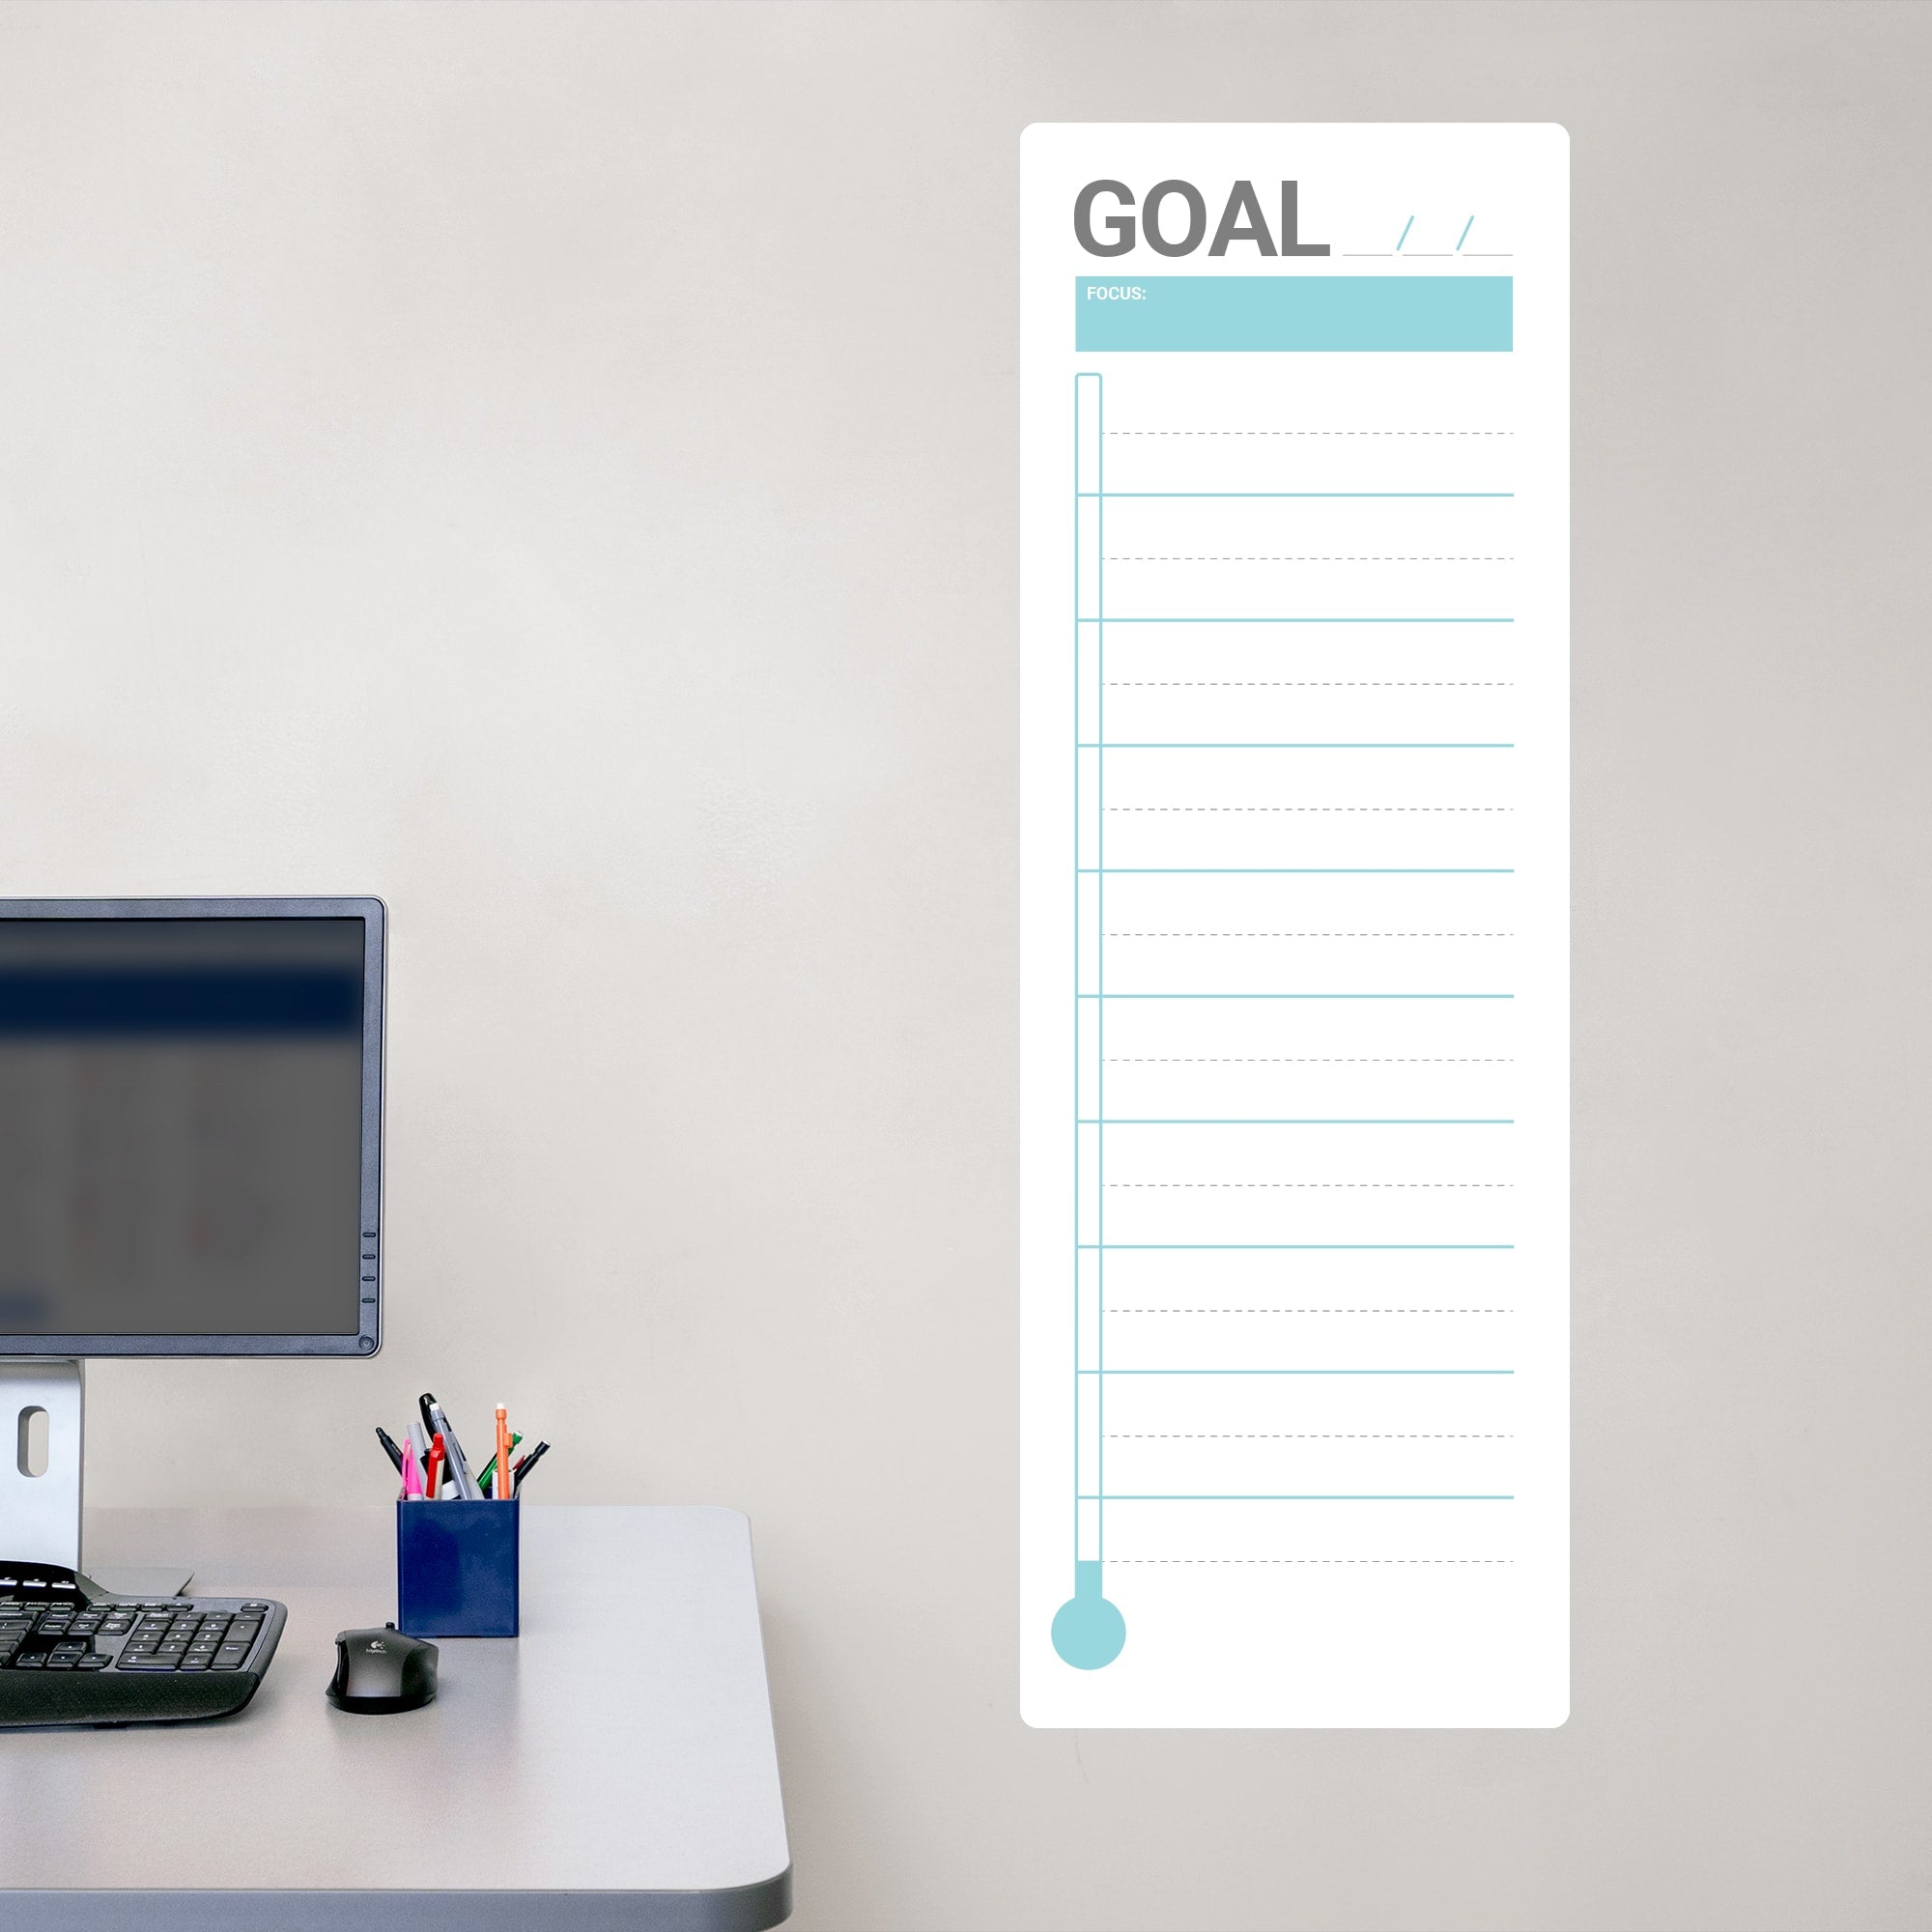 Goal Thermometer: Minamalist Design - Removable Dry Erase Vinyl Decal in Turquoise (42"W x 14"H) by Fathead